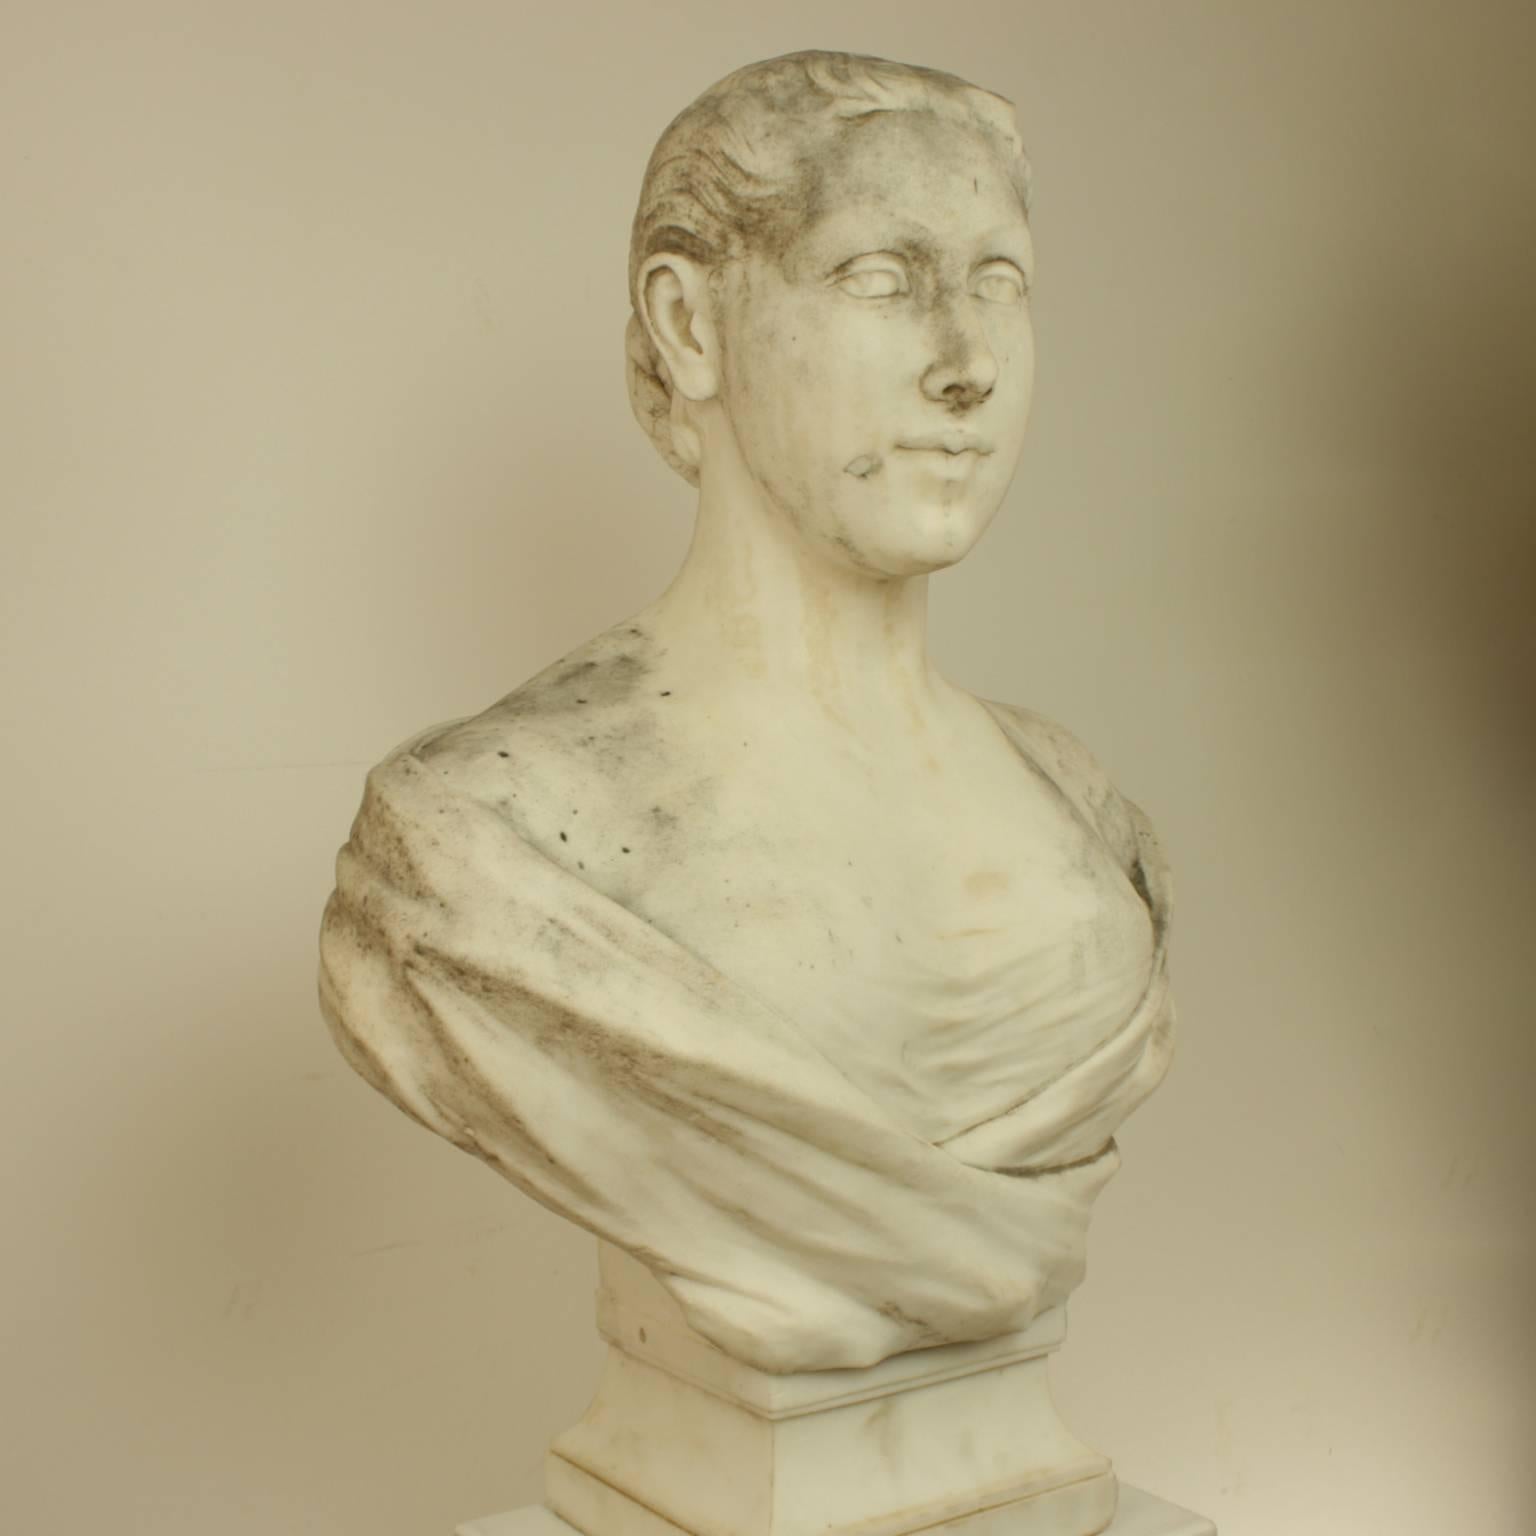 The marble bust facing frontal with her eyes looking to her right. The hair fastened in a skillfull knot behind, the drapery covers her shoulders and breasts, with another section underneath. The young woman displays an observing gaze and knowing